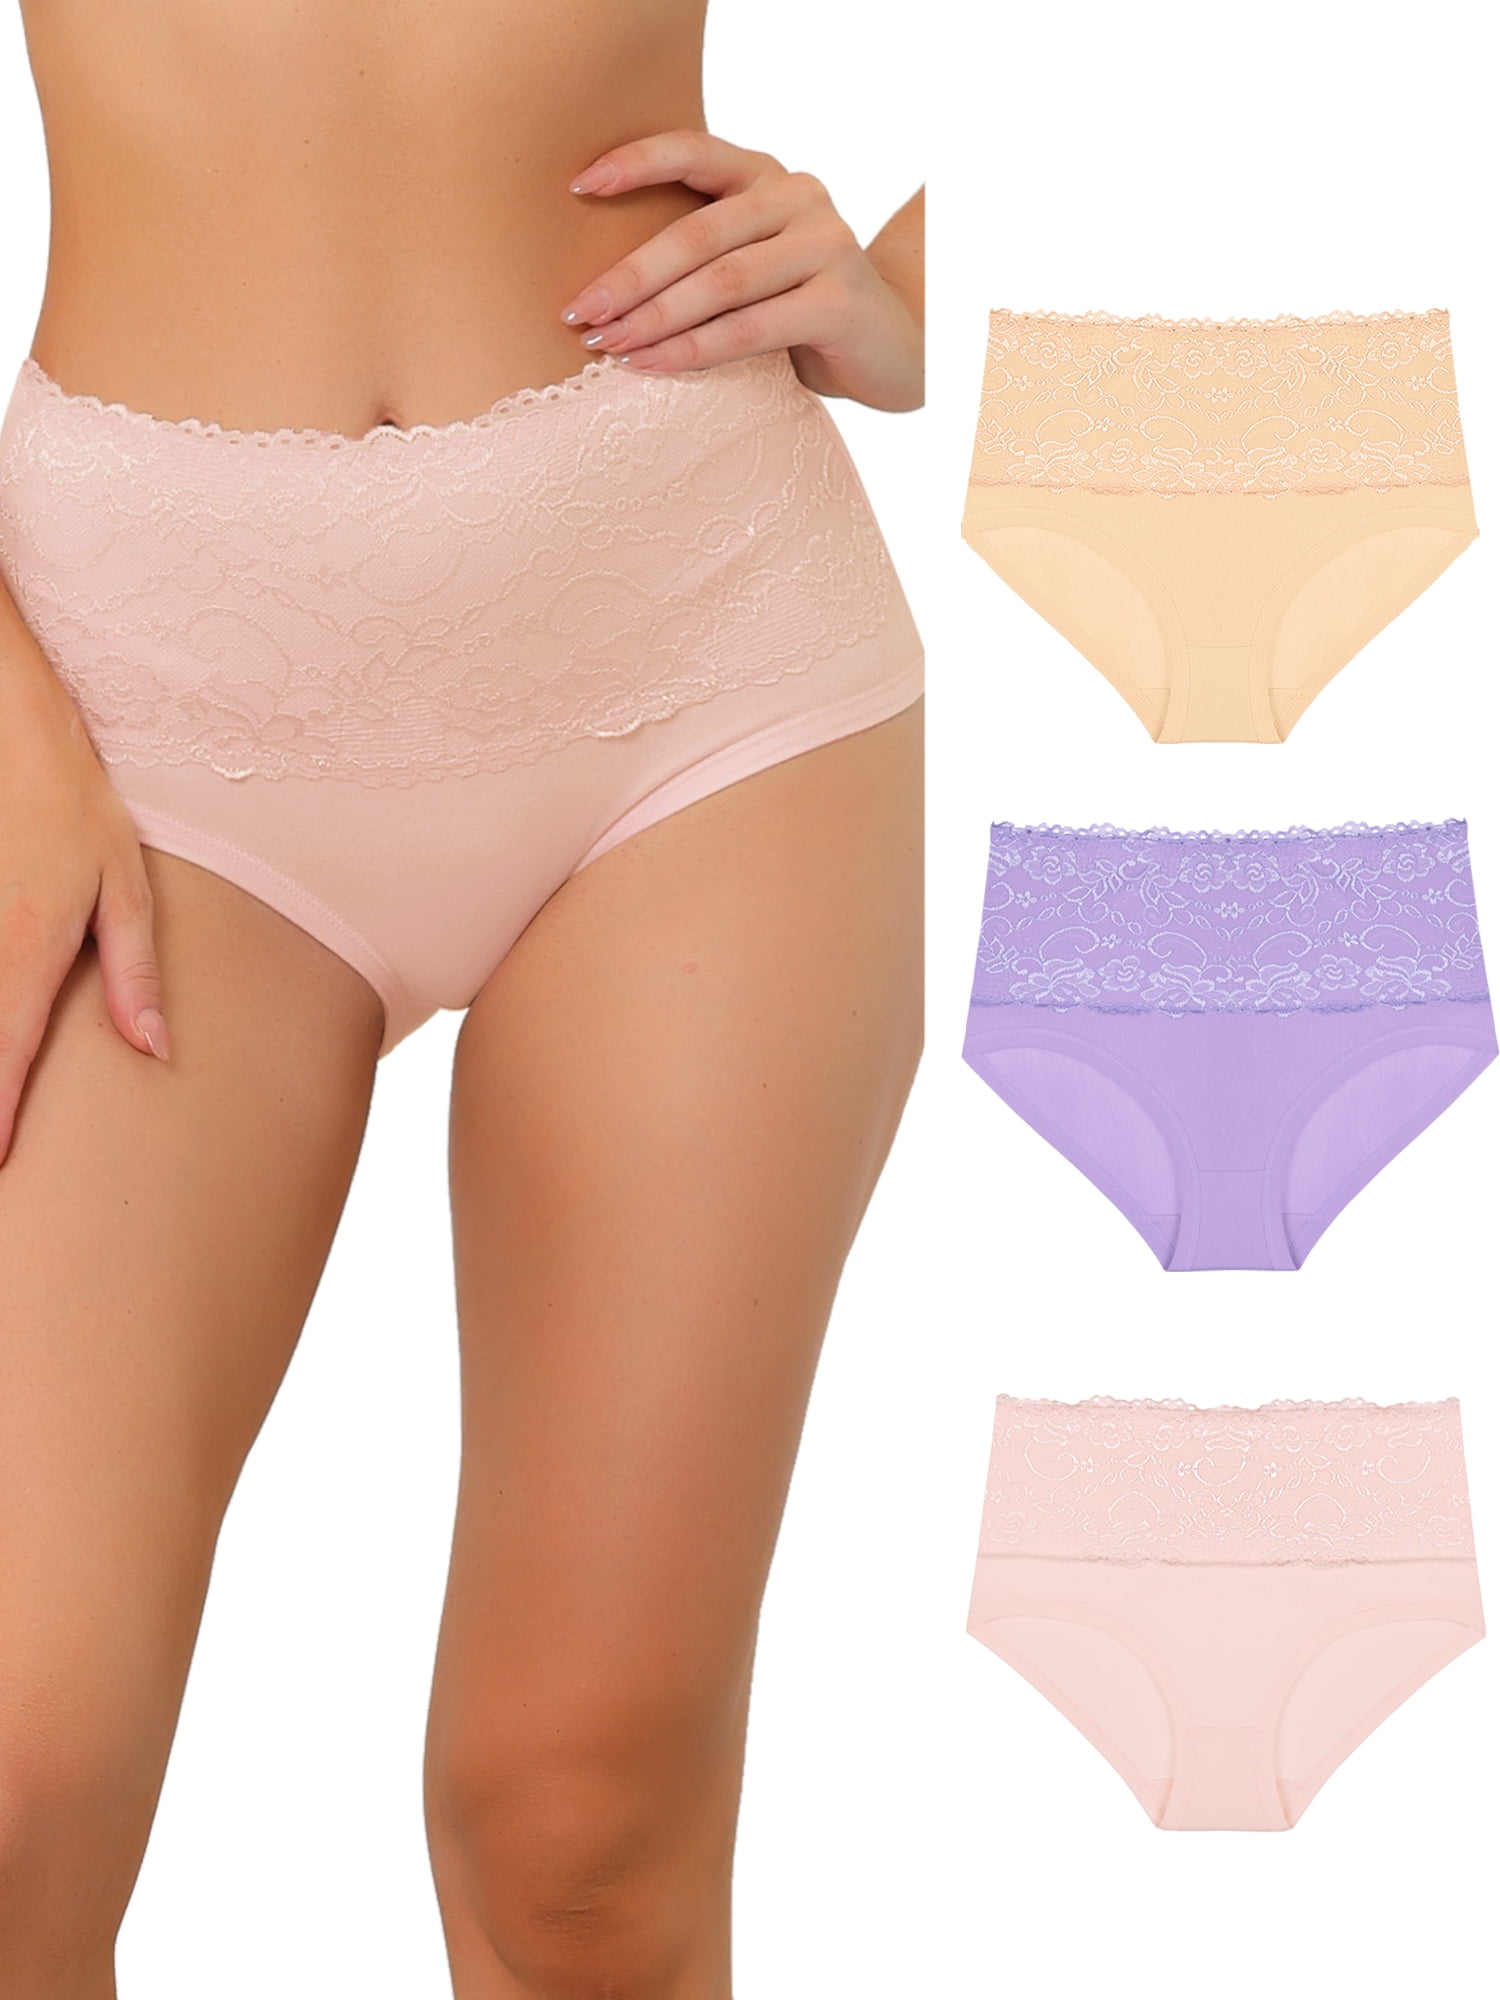 Agnes Orinda Women's Plus Size Panties Underwear Lace Breathable Mid Waist  Stretch Briefs Pink Small